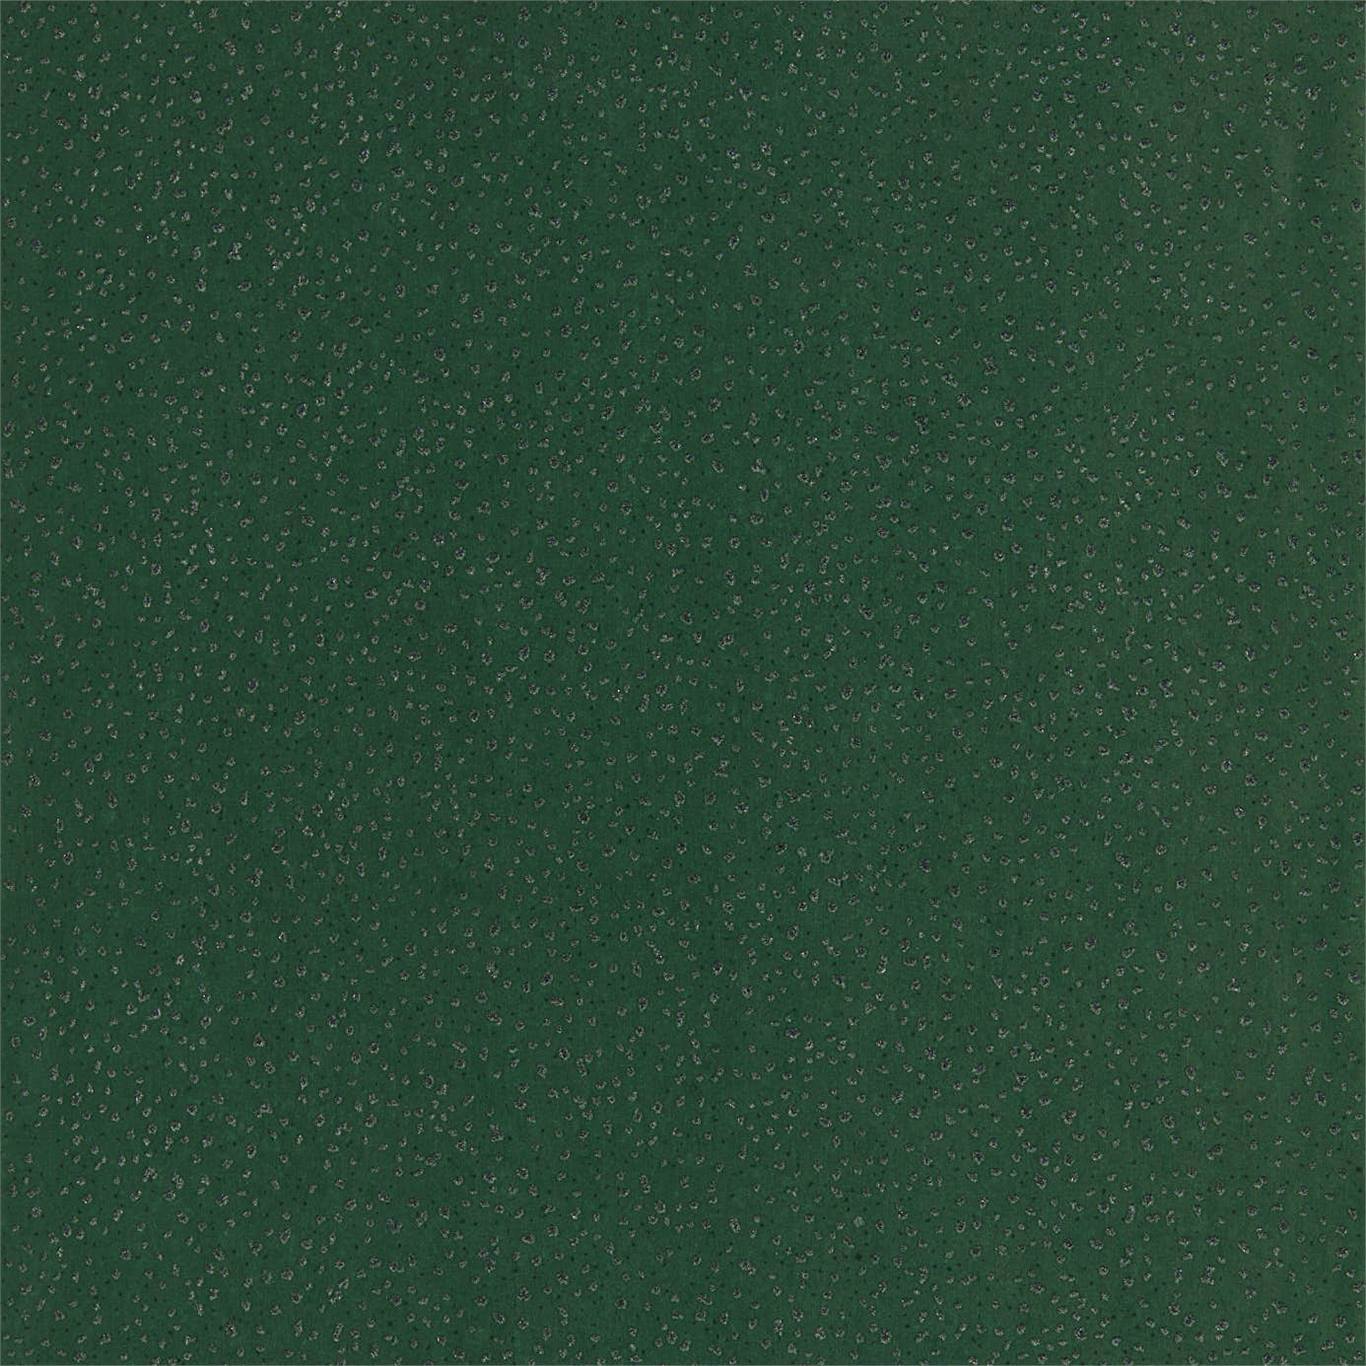 Anthology Foxy Emerald Wallpaper by HAR